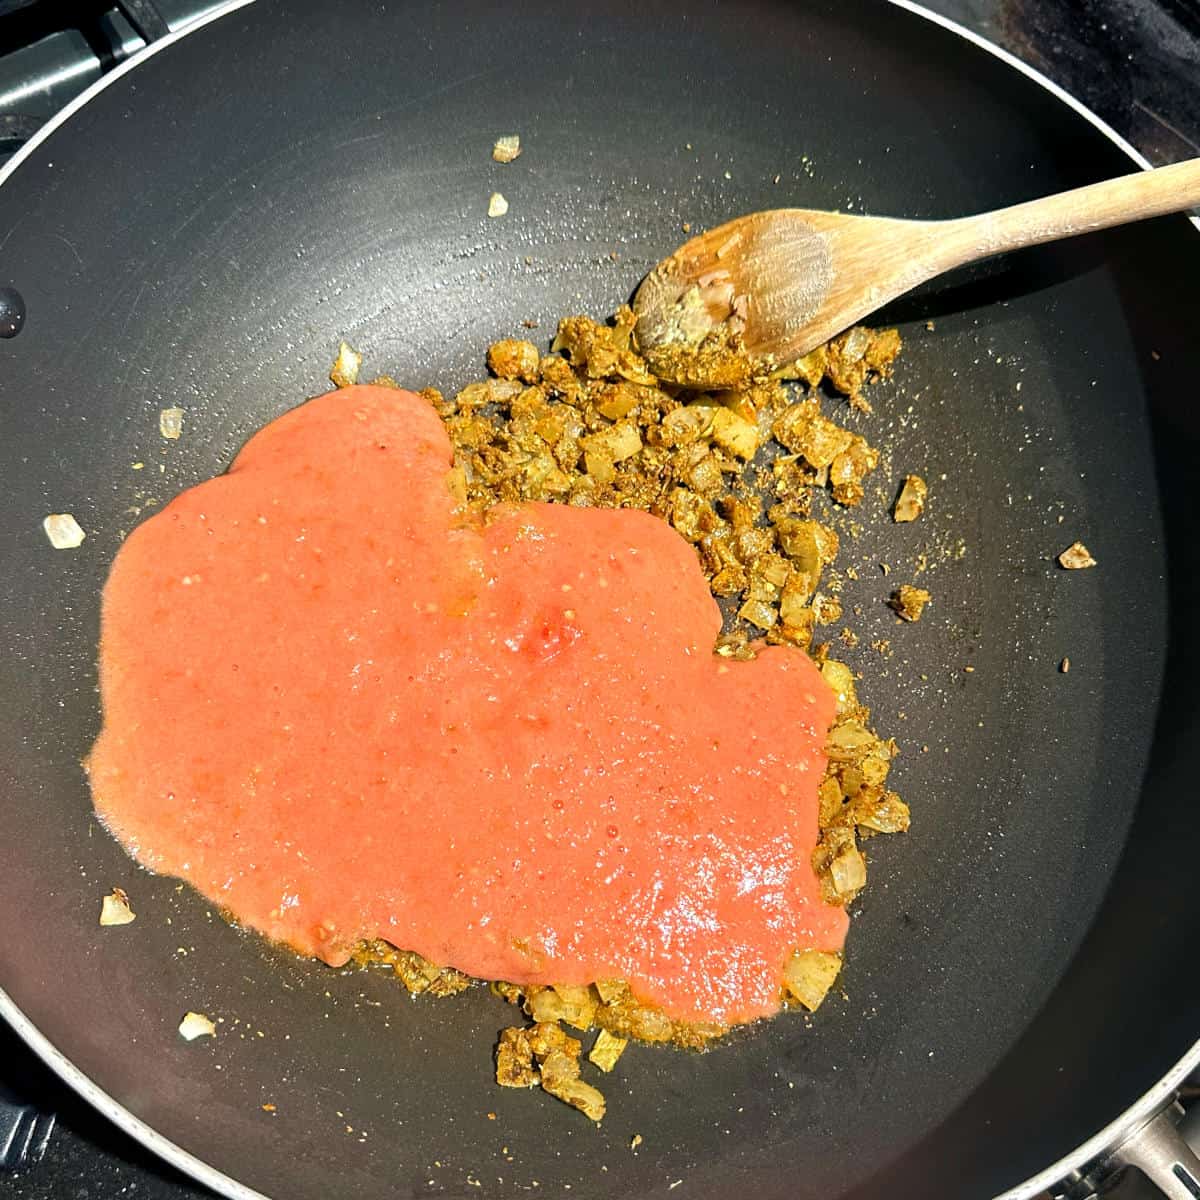 Tomato puree added to wok with onions and spices.